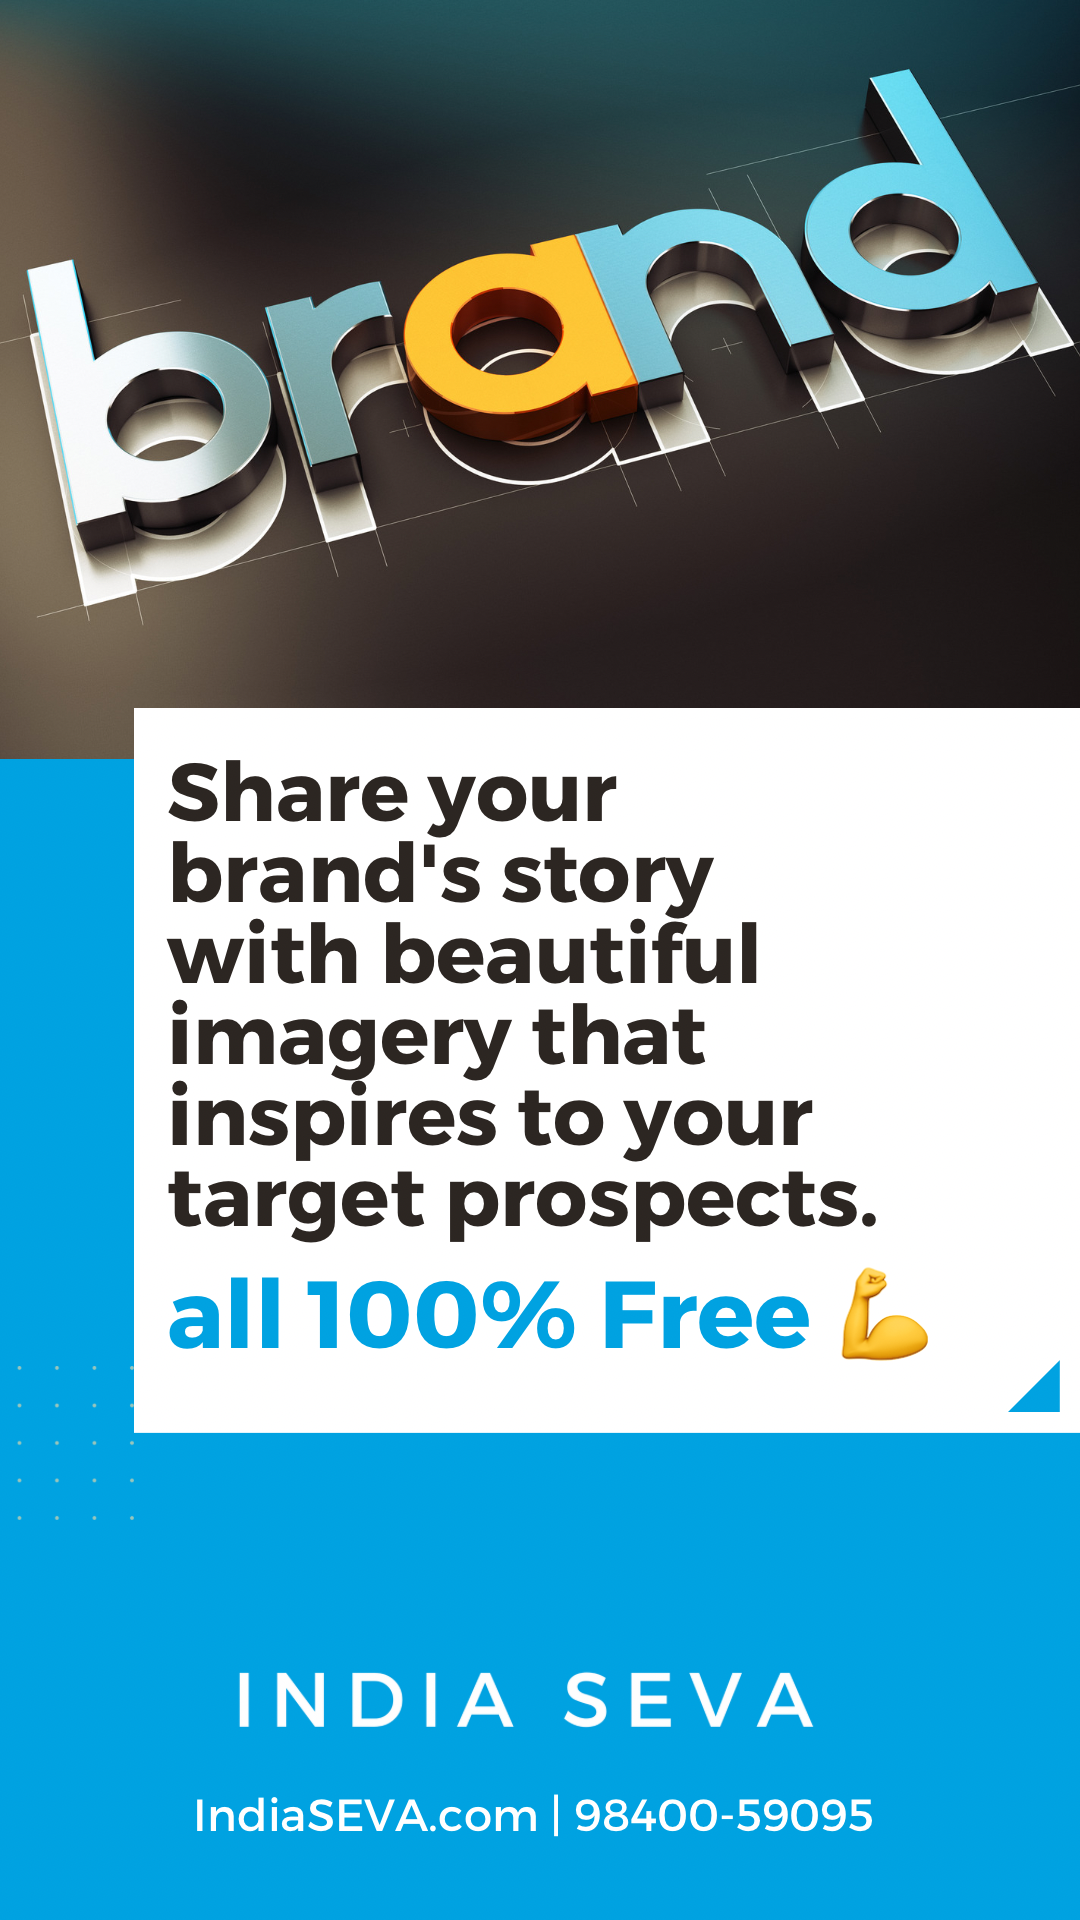 Share your brand's story with beautiful imagery that inspires to your target prospects.